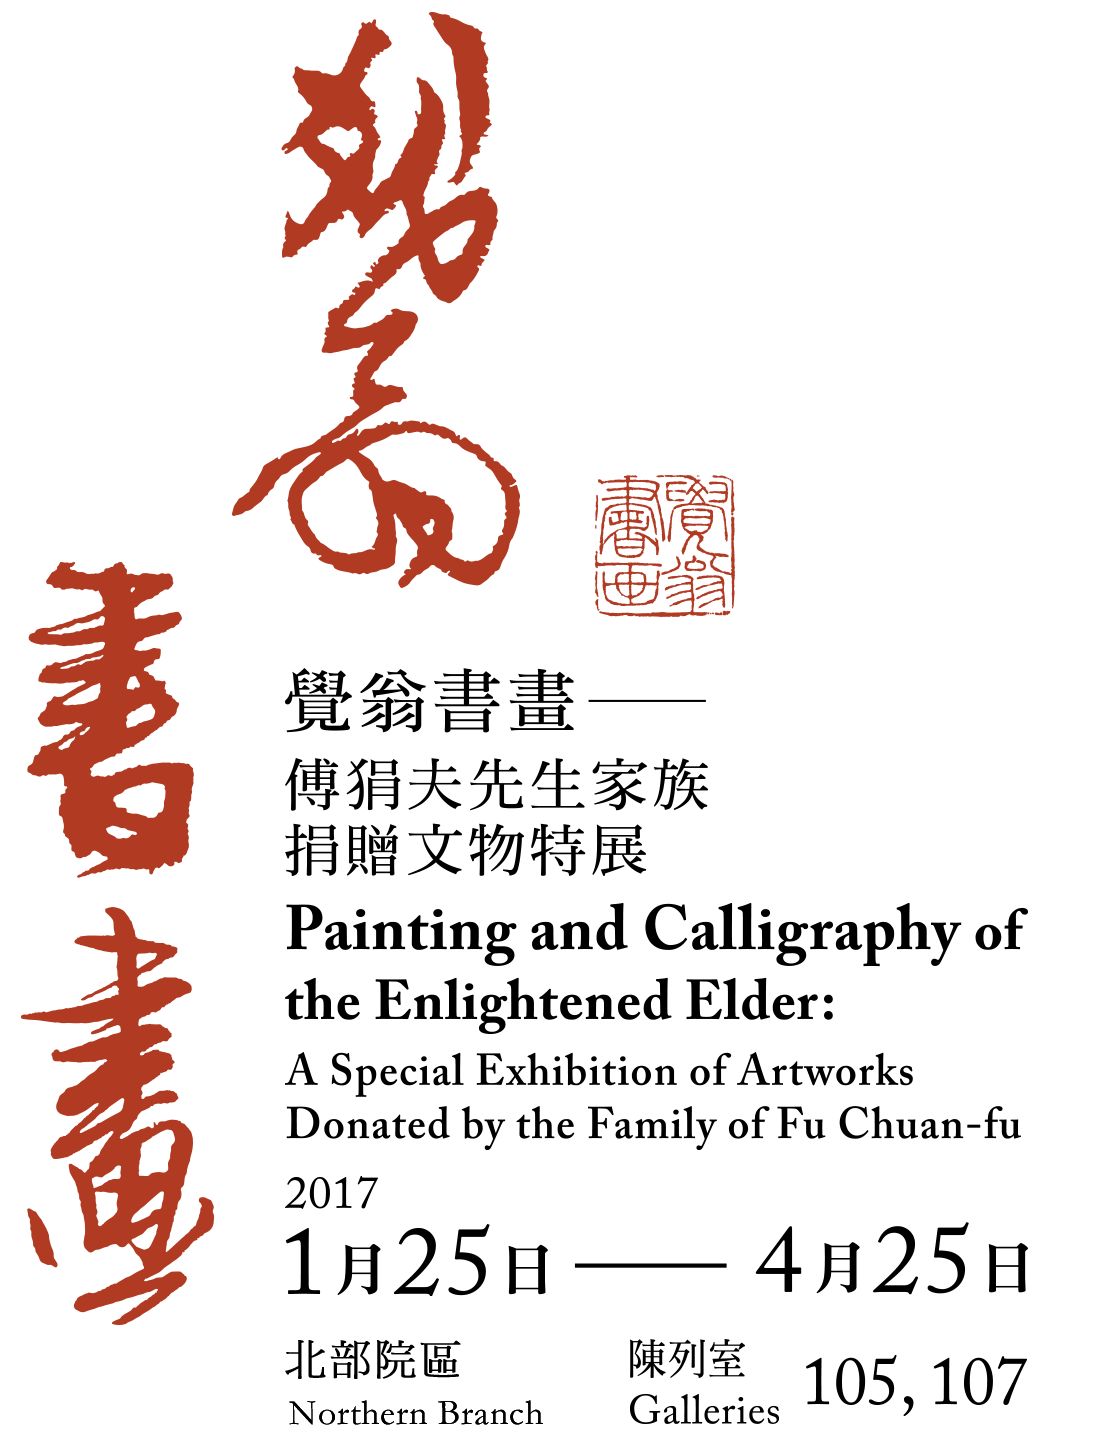 Painting and Calligraphy of the Enlightened Elder: A Special Exhibition of Artworks Donated by the Family of Fu Chuan-fu,period 2017/01/25 to 2017/04/25,Galleries105、107